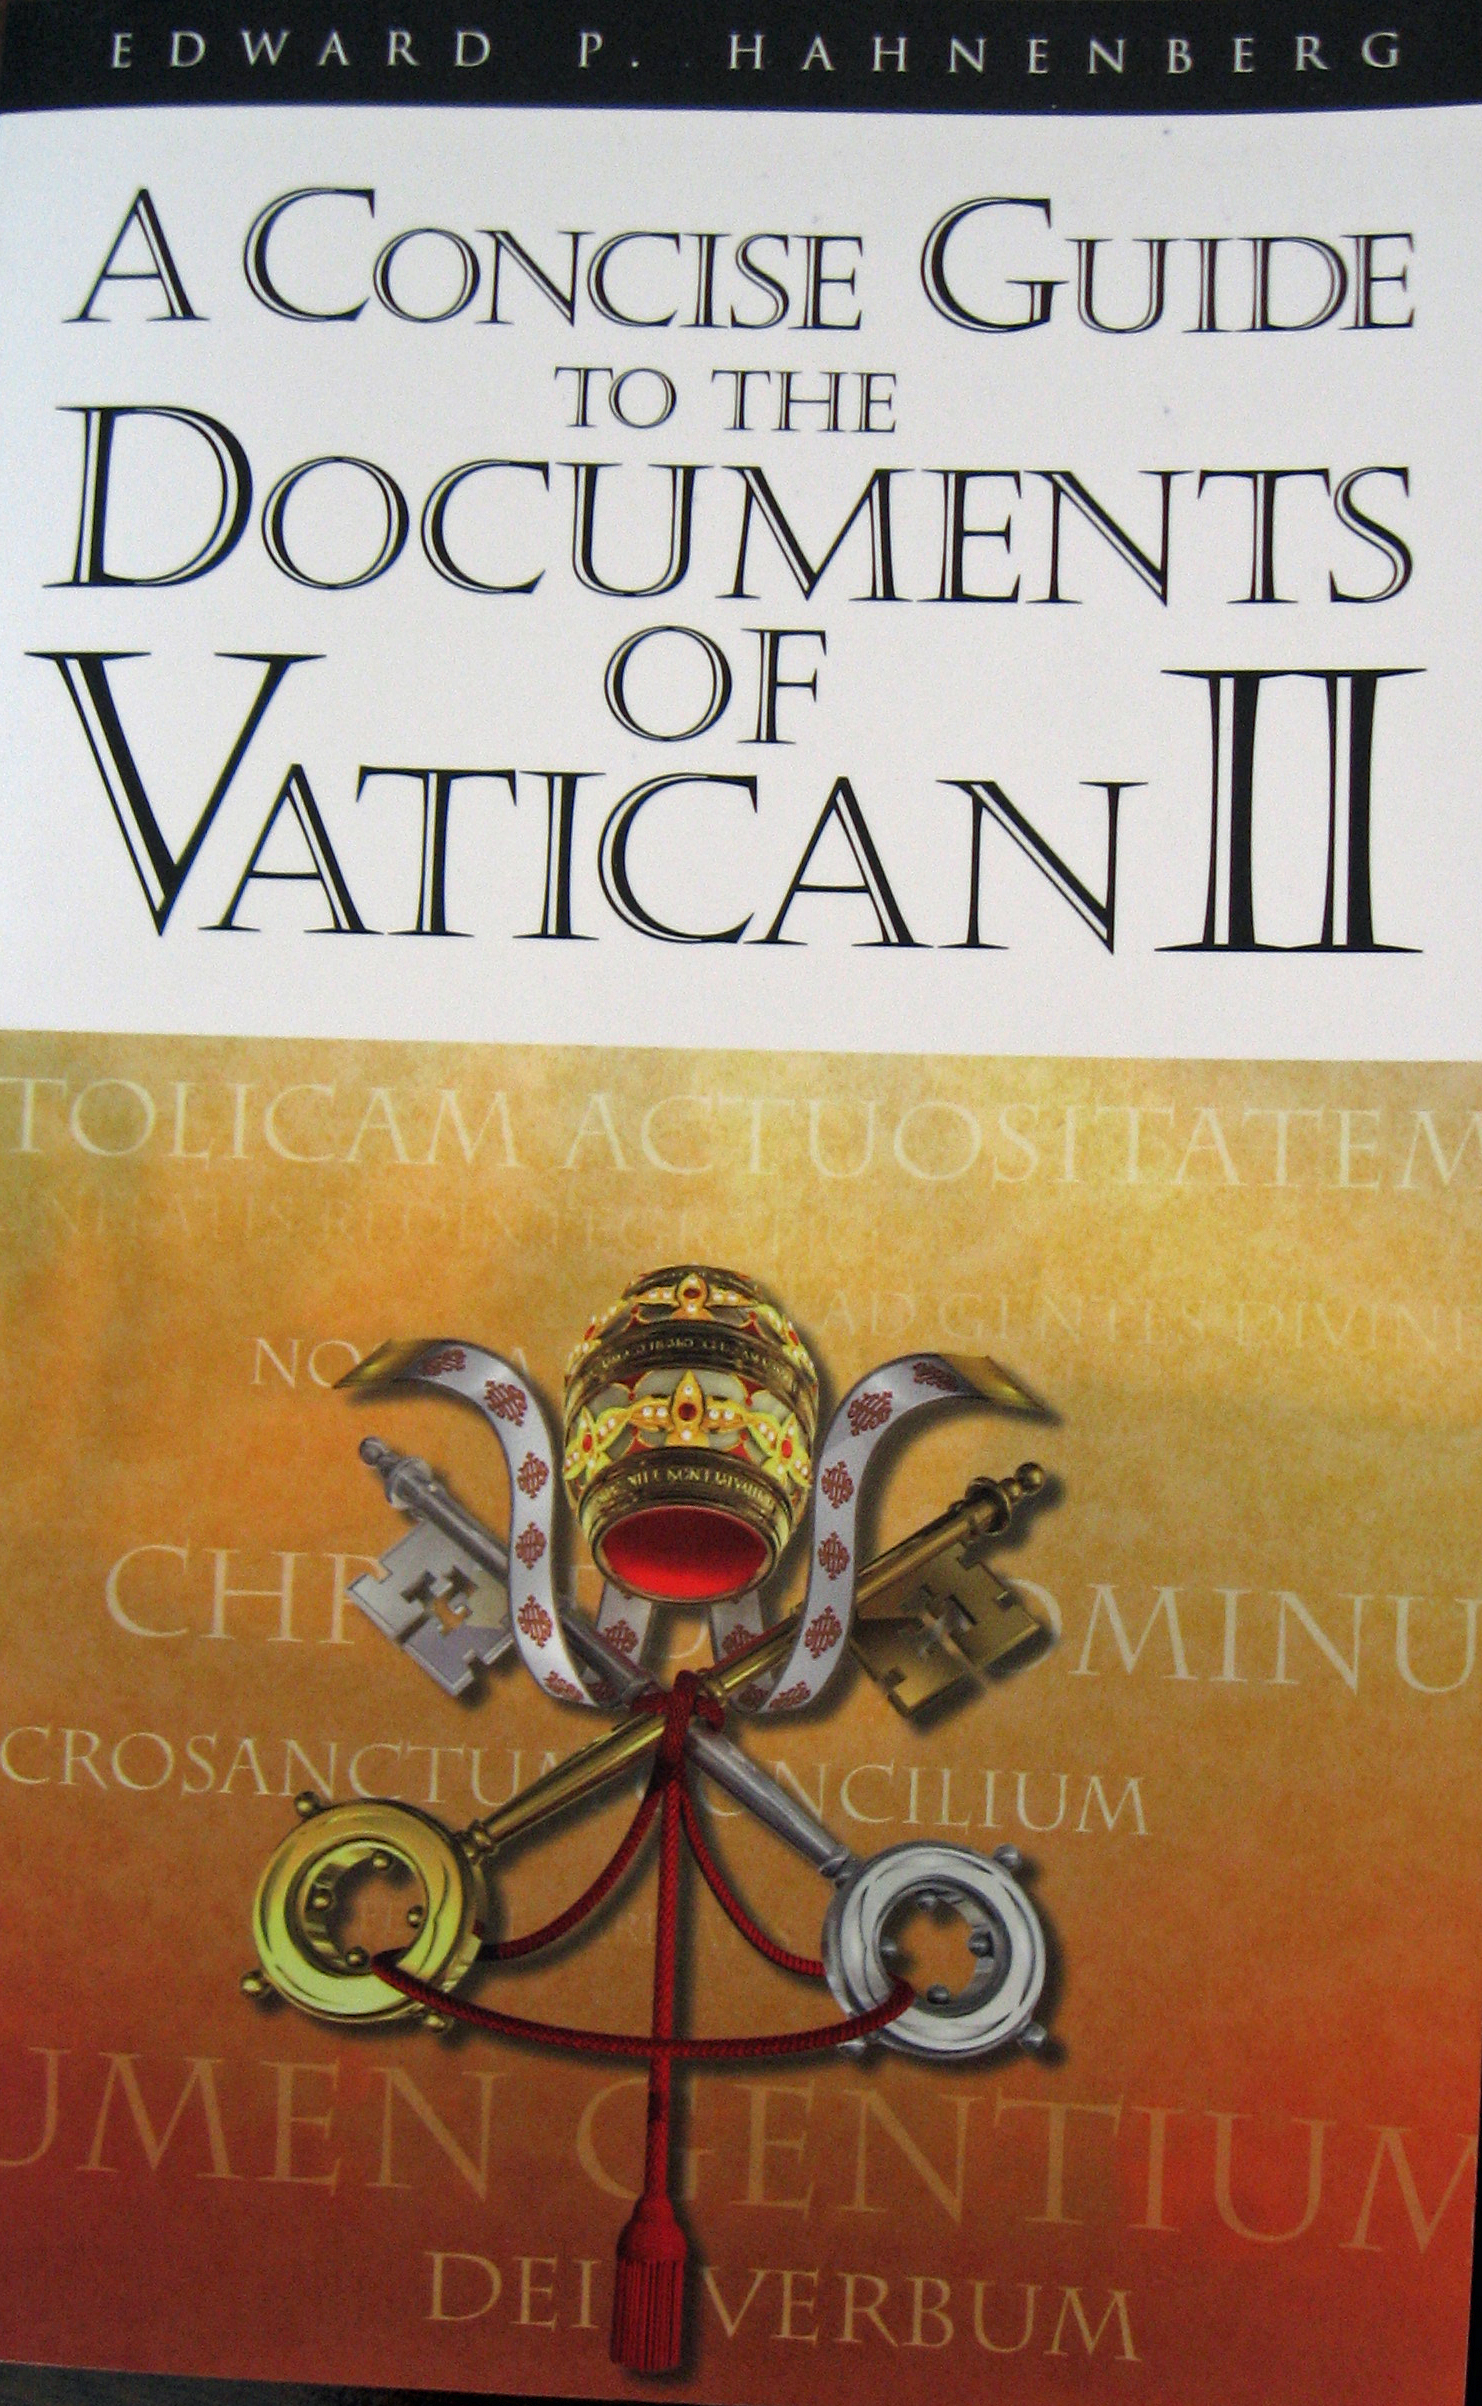 A Concise Guide To The Documents of Vatican II by Edward P. Hahnenberg 108-9780867165524